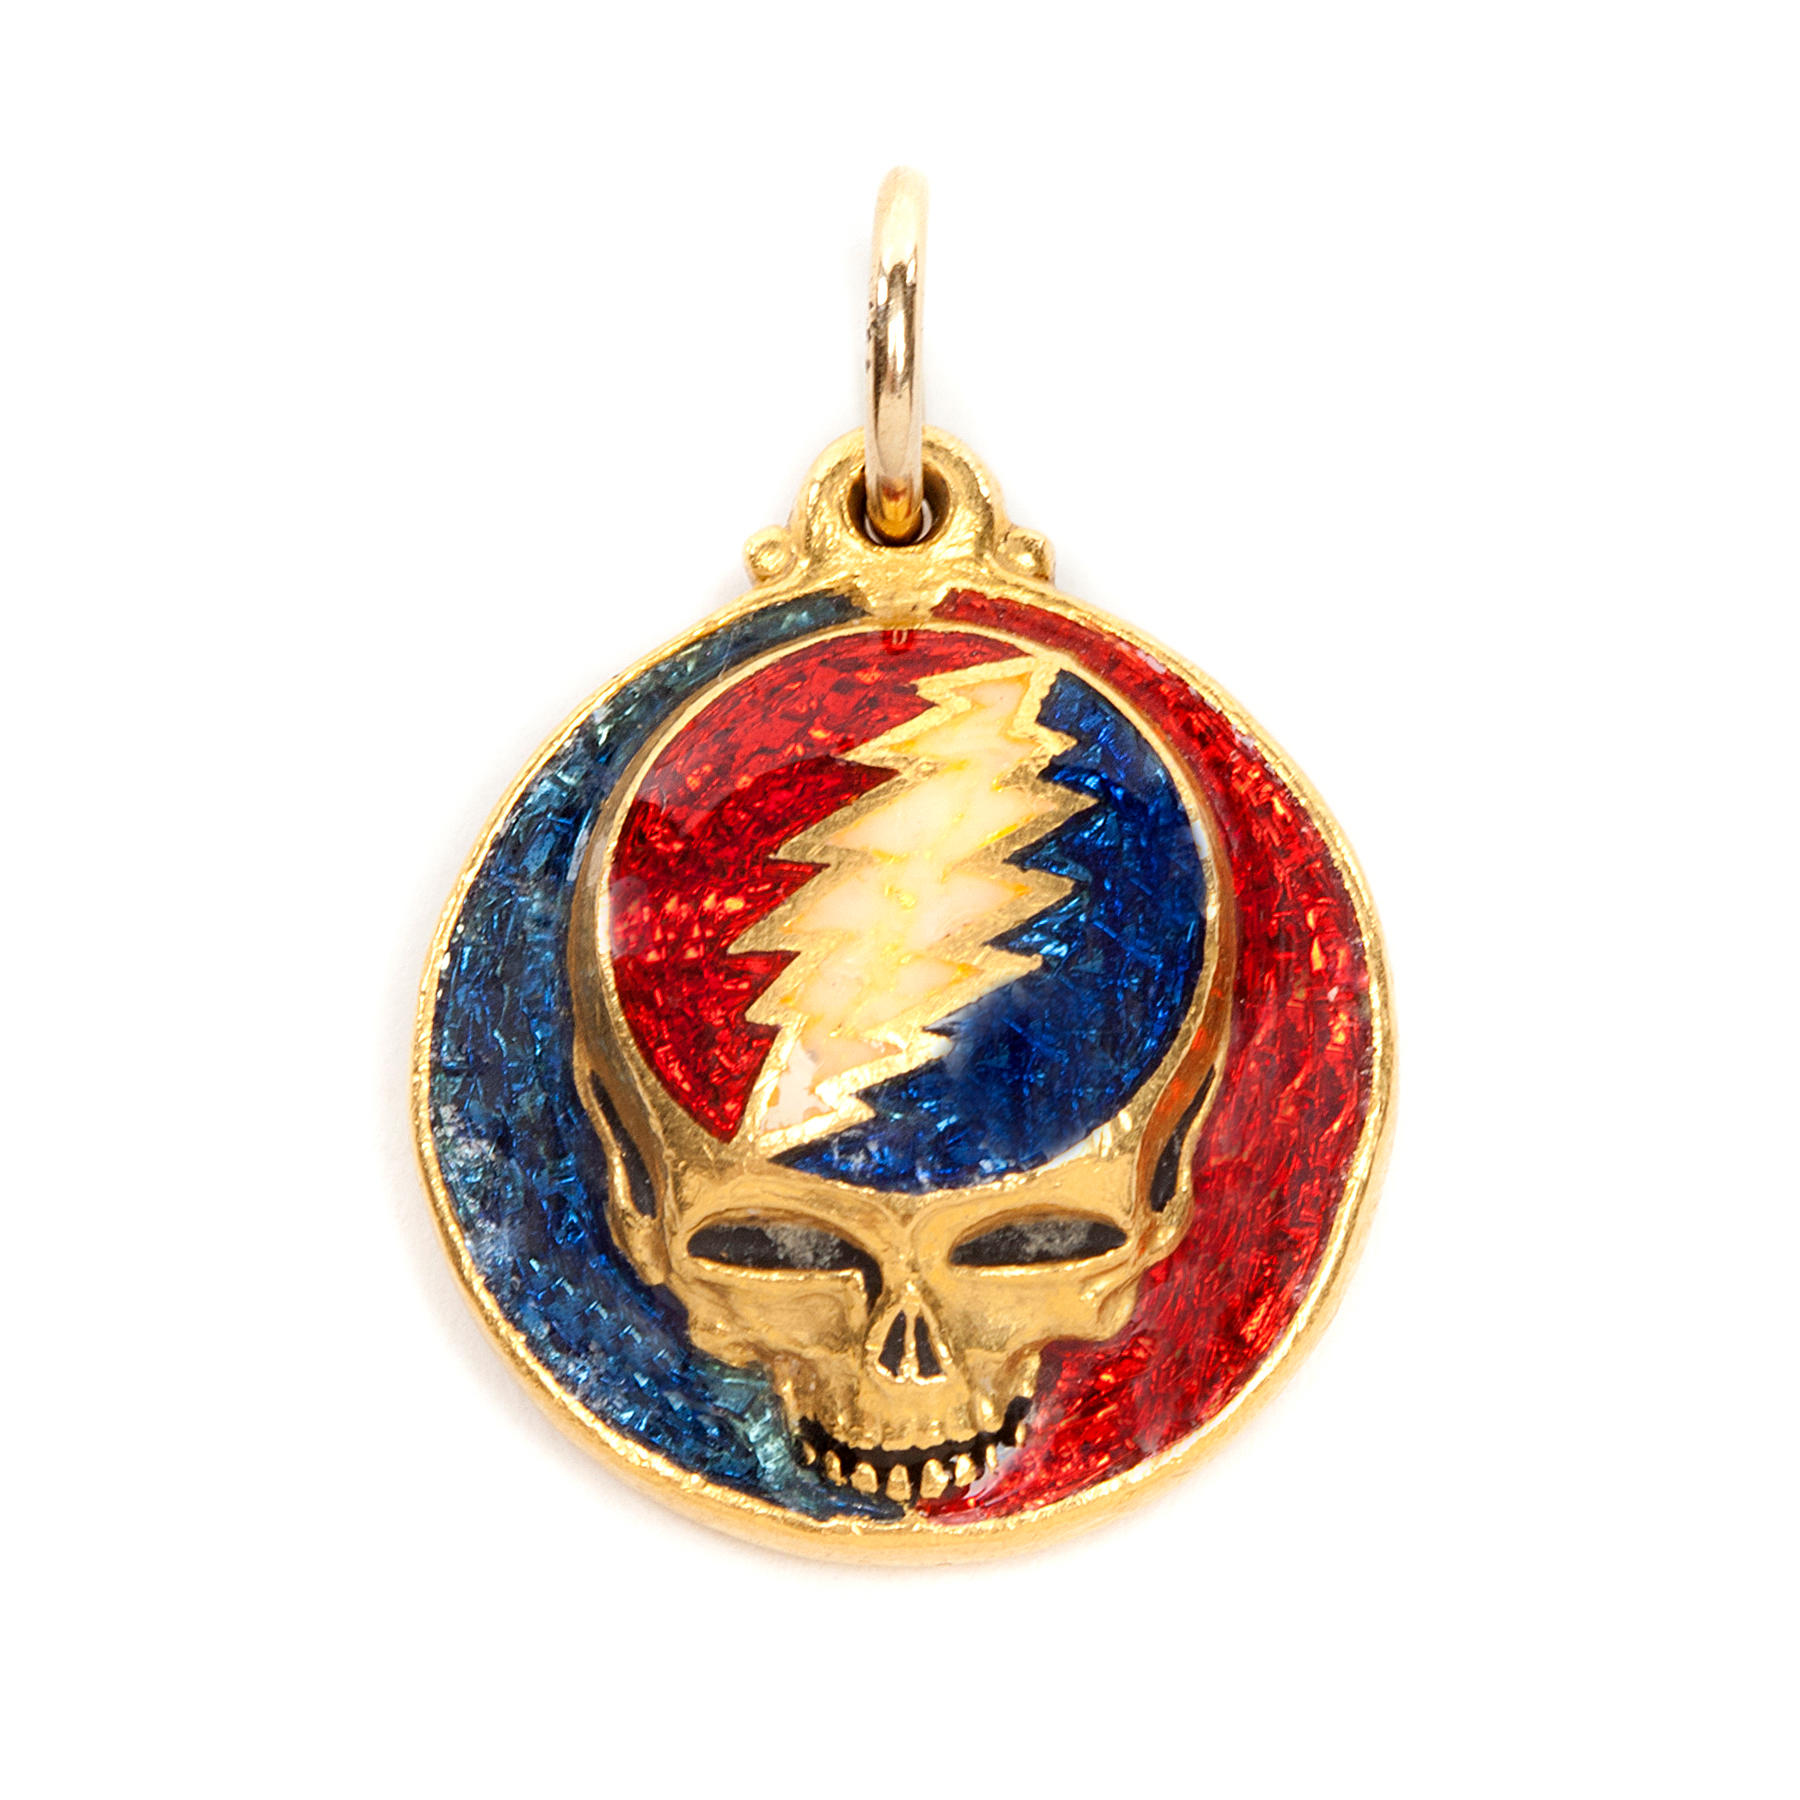 Grateful Dead Auction Includes Jewelry Created By Owsley 'Bear' Stanley